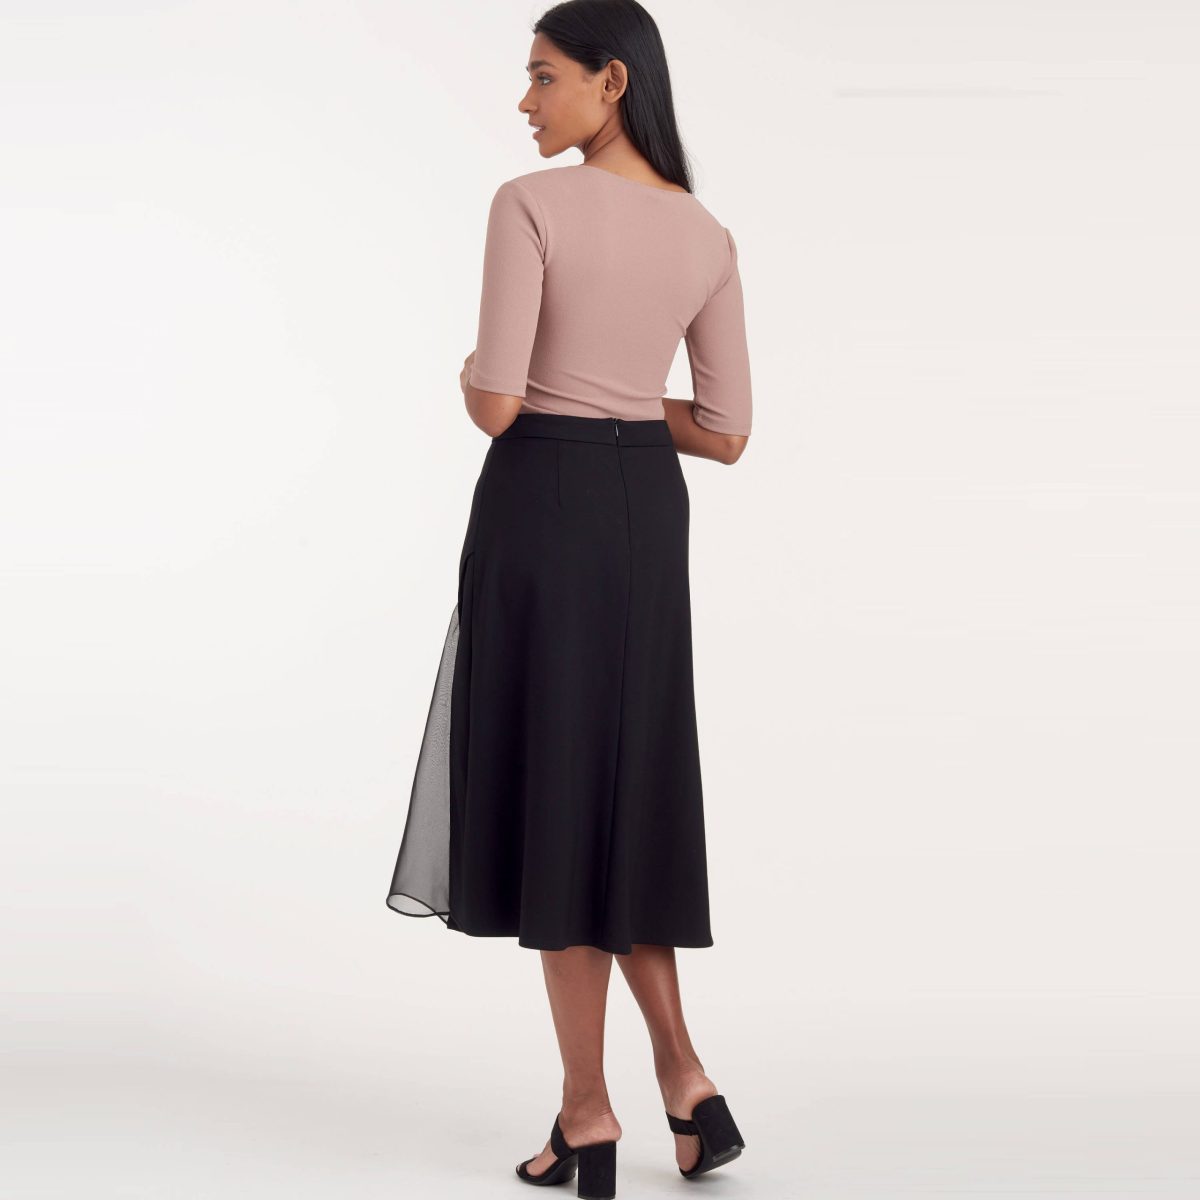 Simplicity Sewing Pattern S9238 Misses' Skirts